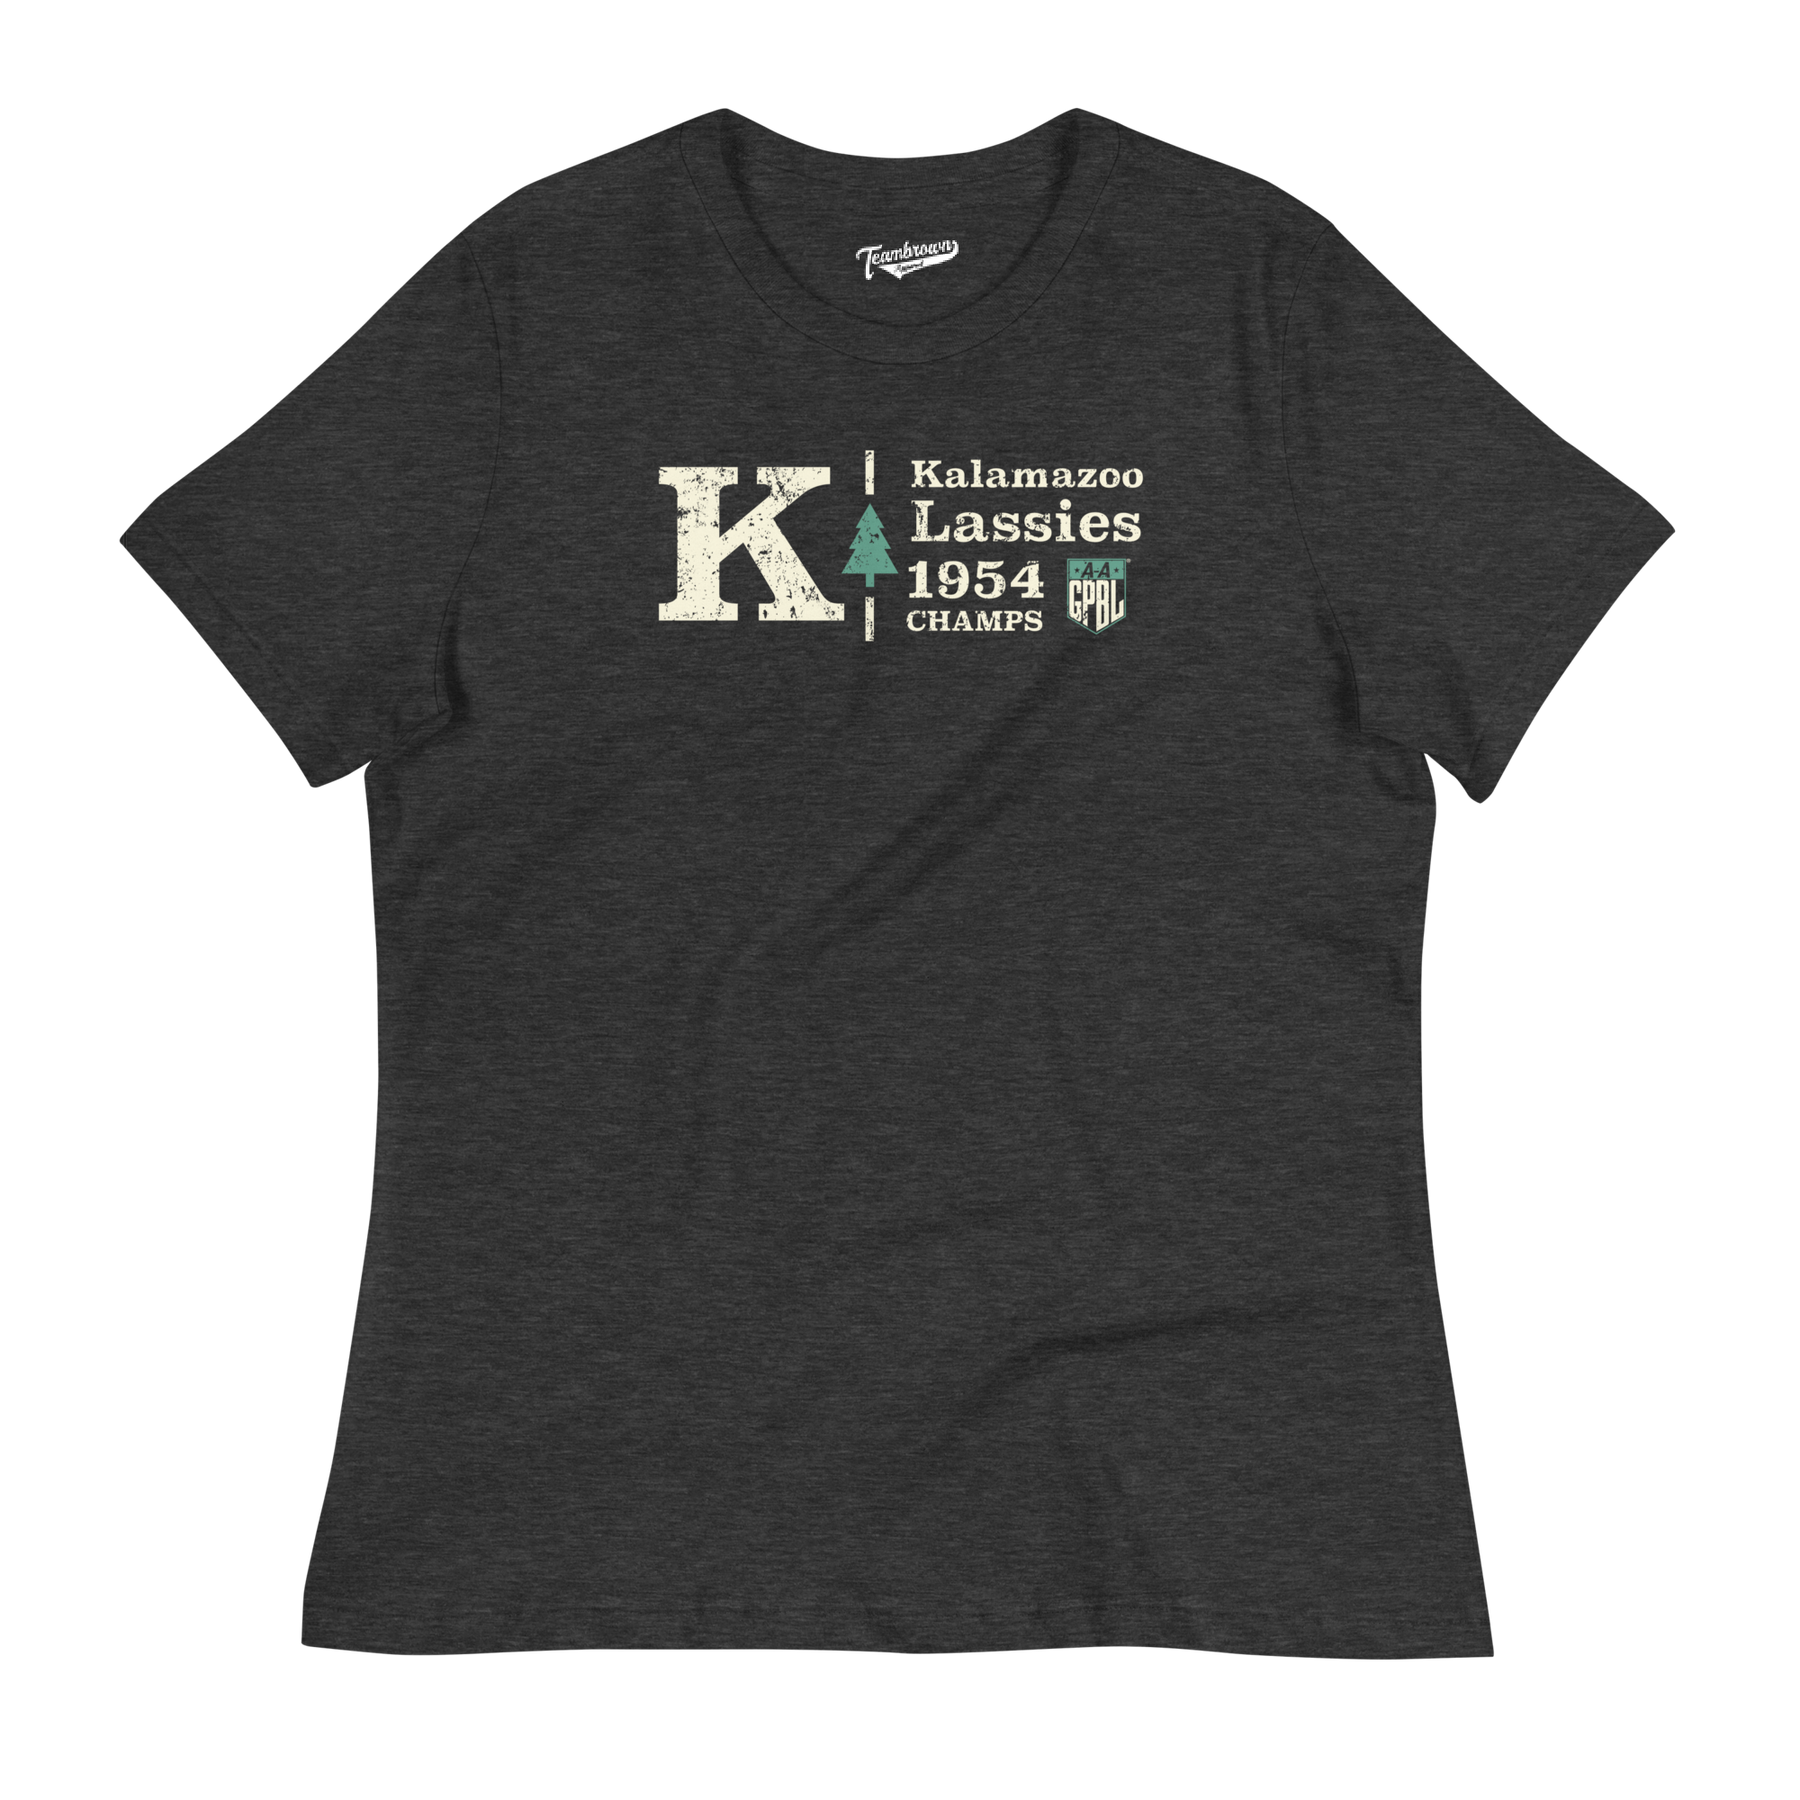 Kalamazoo Lassies Champions - Women's Relaxed Fit T-Shirt | Officially Licensed - AAGPBL